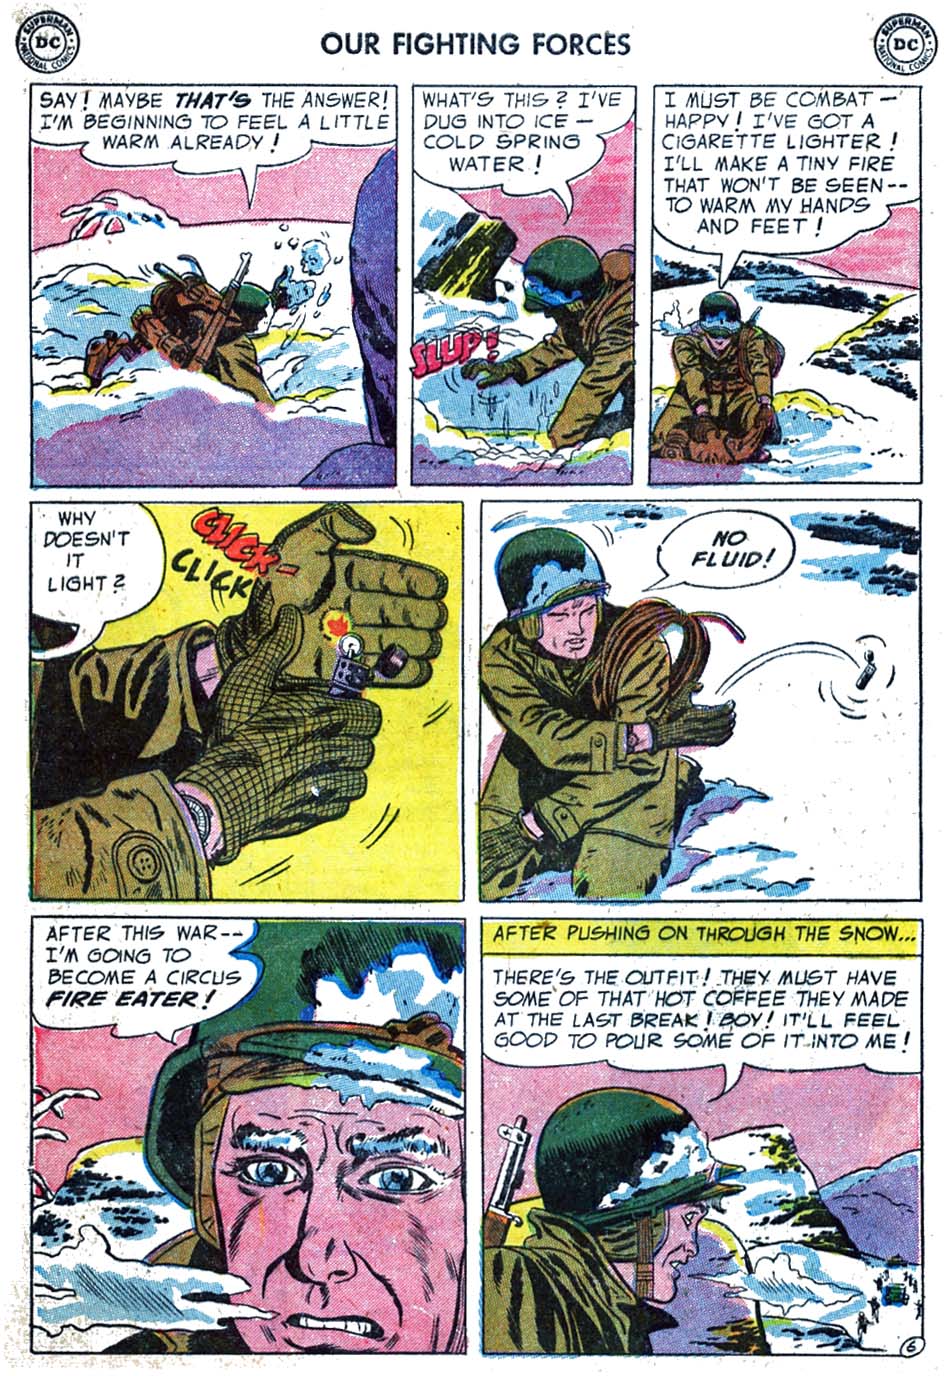 Read online Our Fighting Forces comic -  Issue #3 - 8